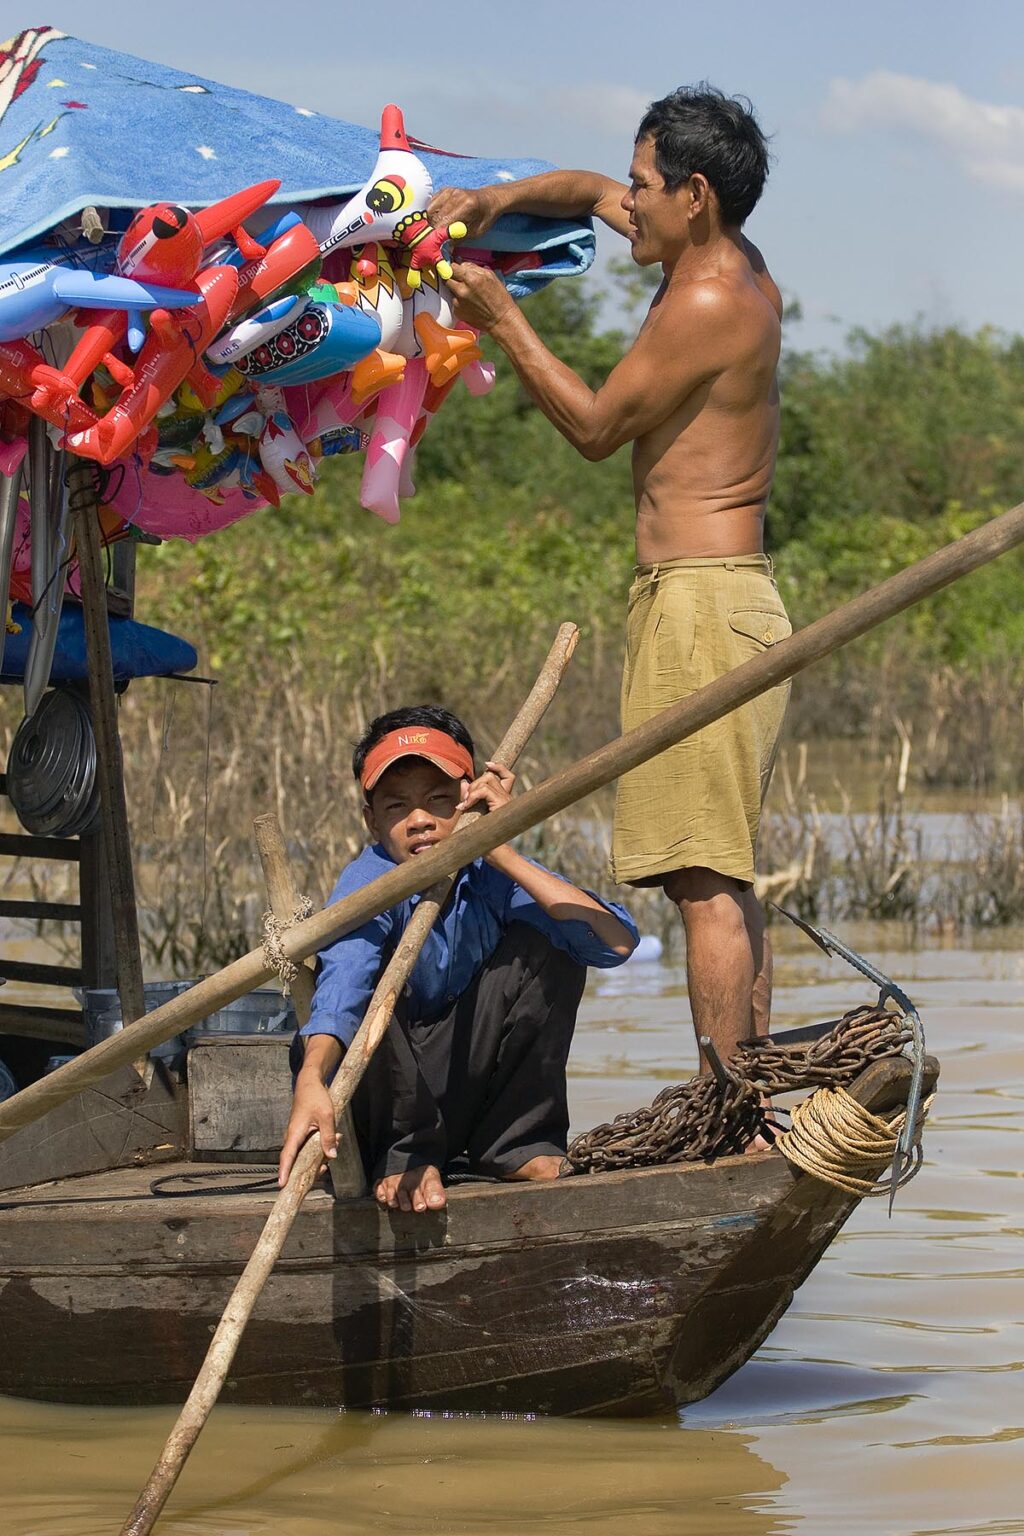 Balloon sellling boat in the Vietnamese floating village of Chong Kneas on lake Tonle Sap - Siem Reap, Cambodia